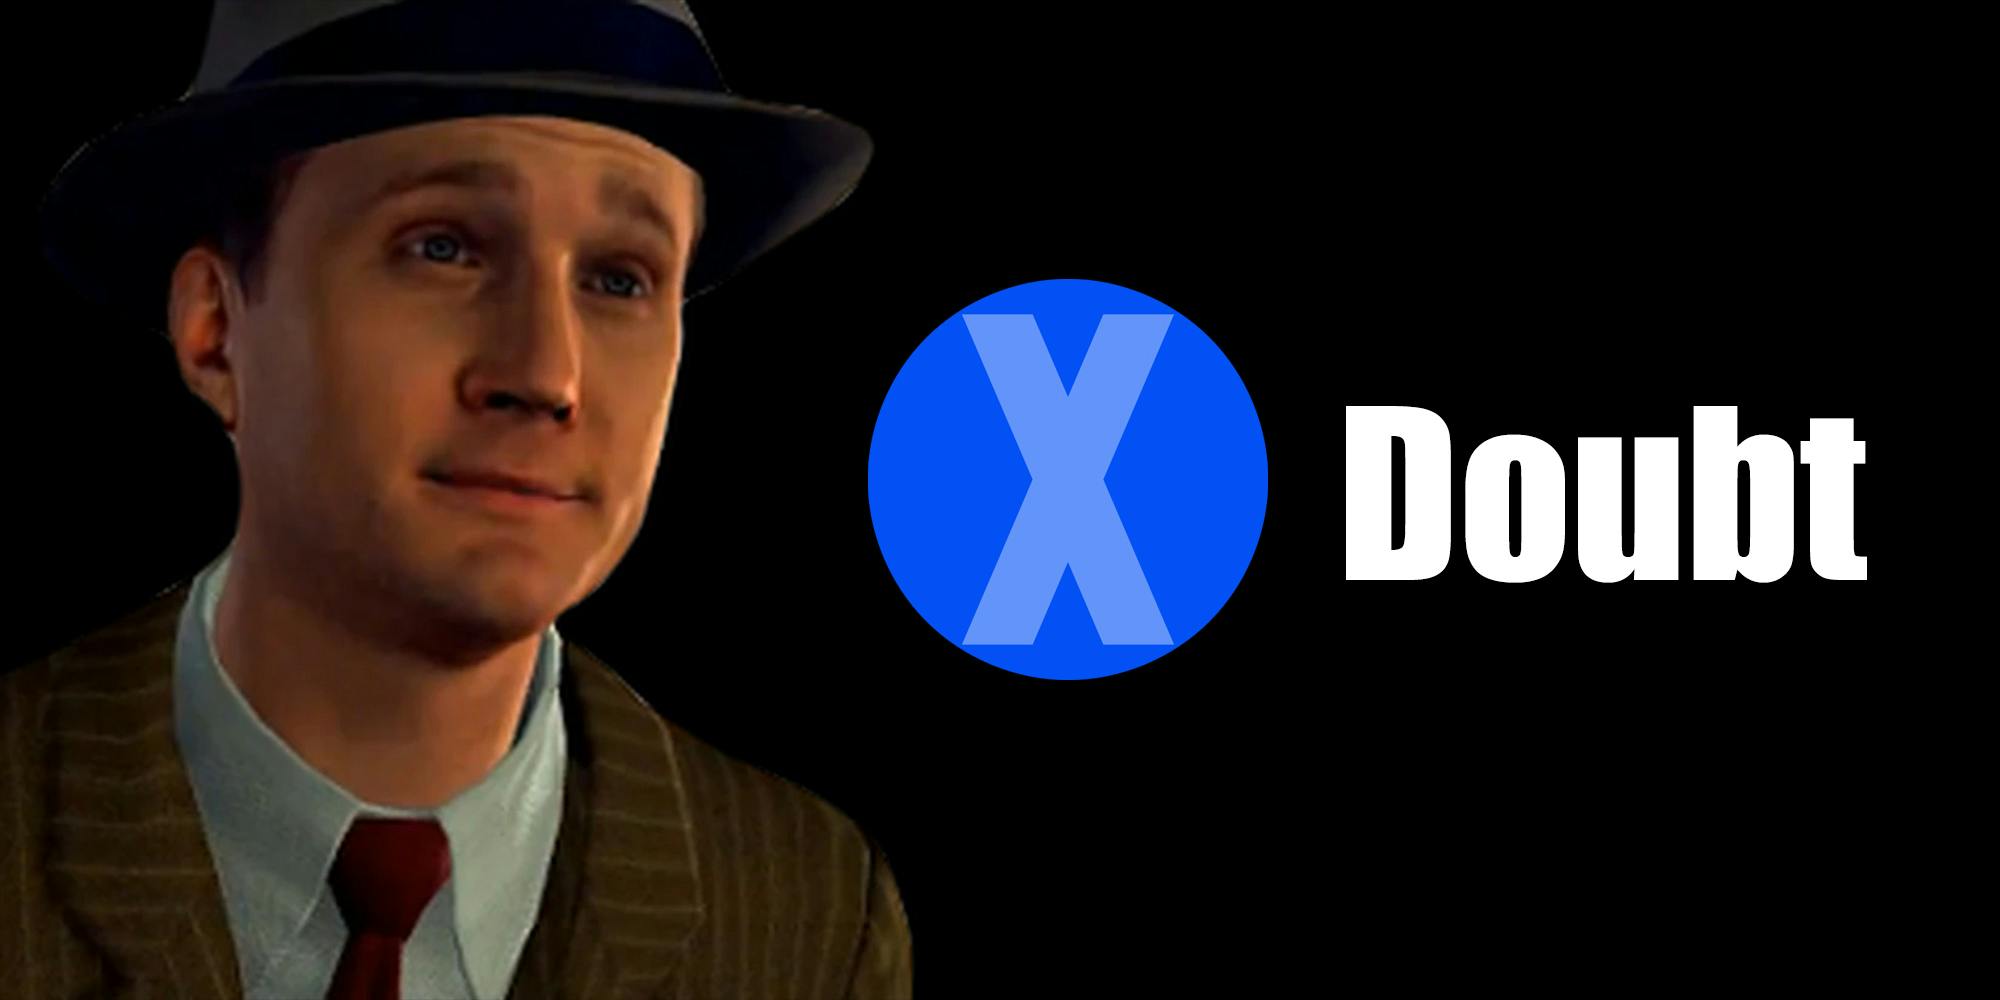 video game character wearing suit with "x" in circle and the word "Doubt"